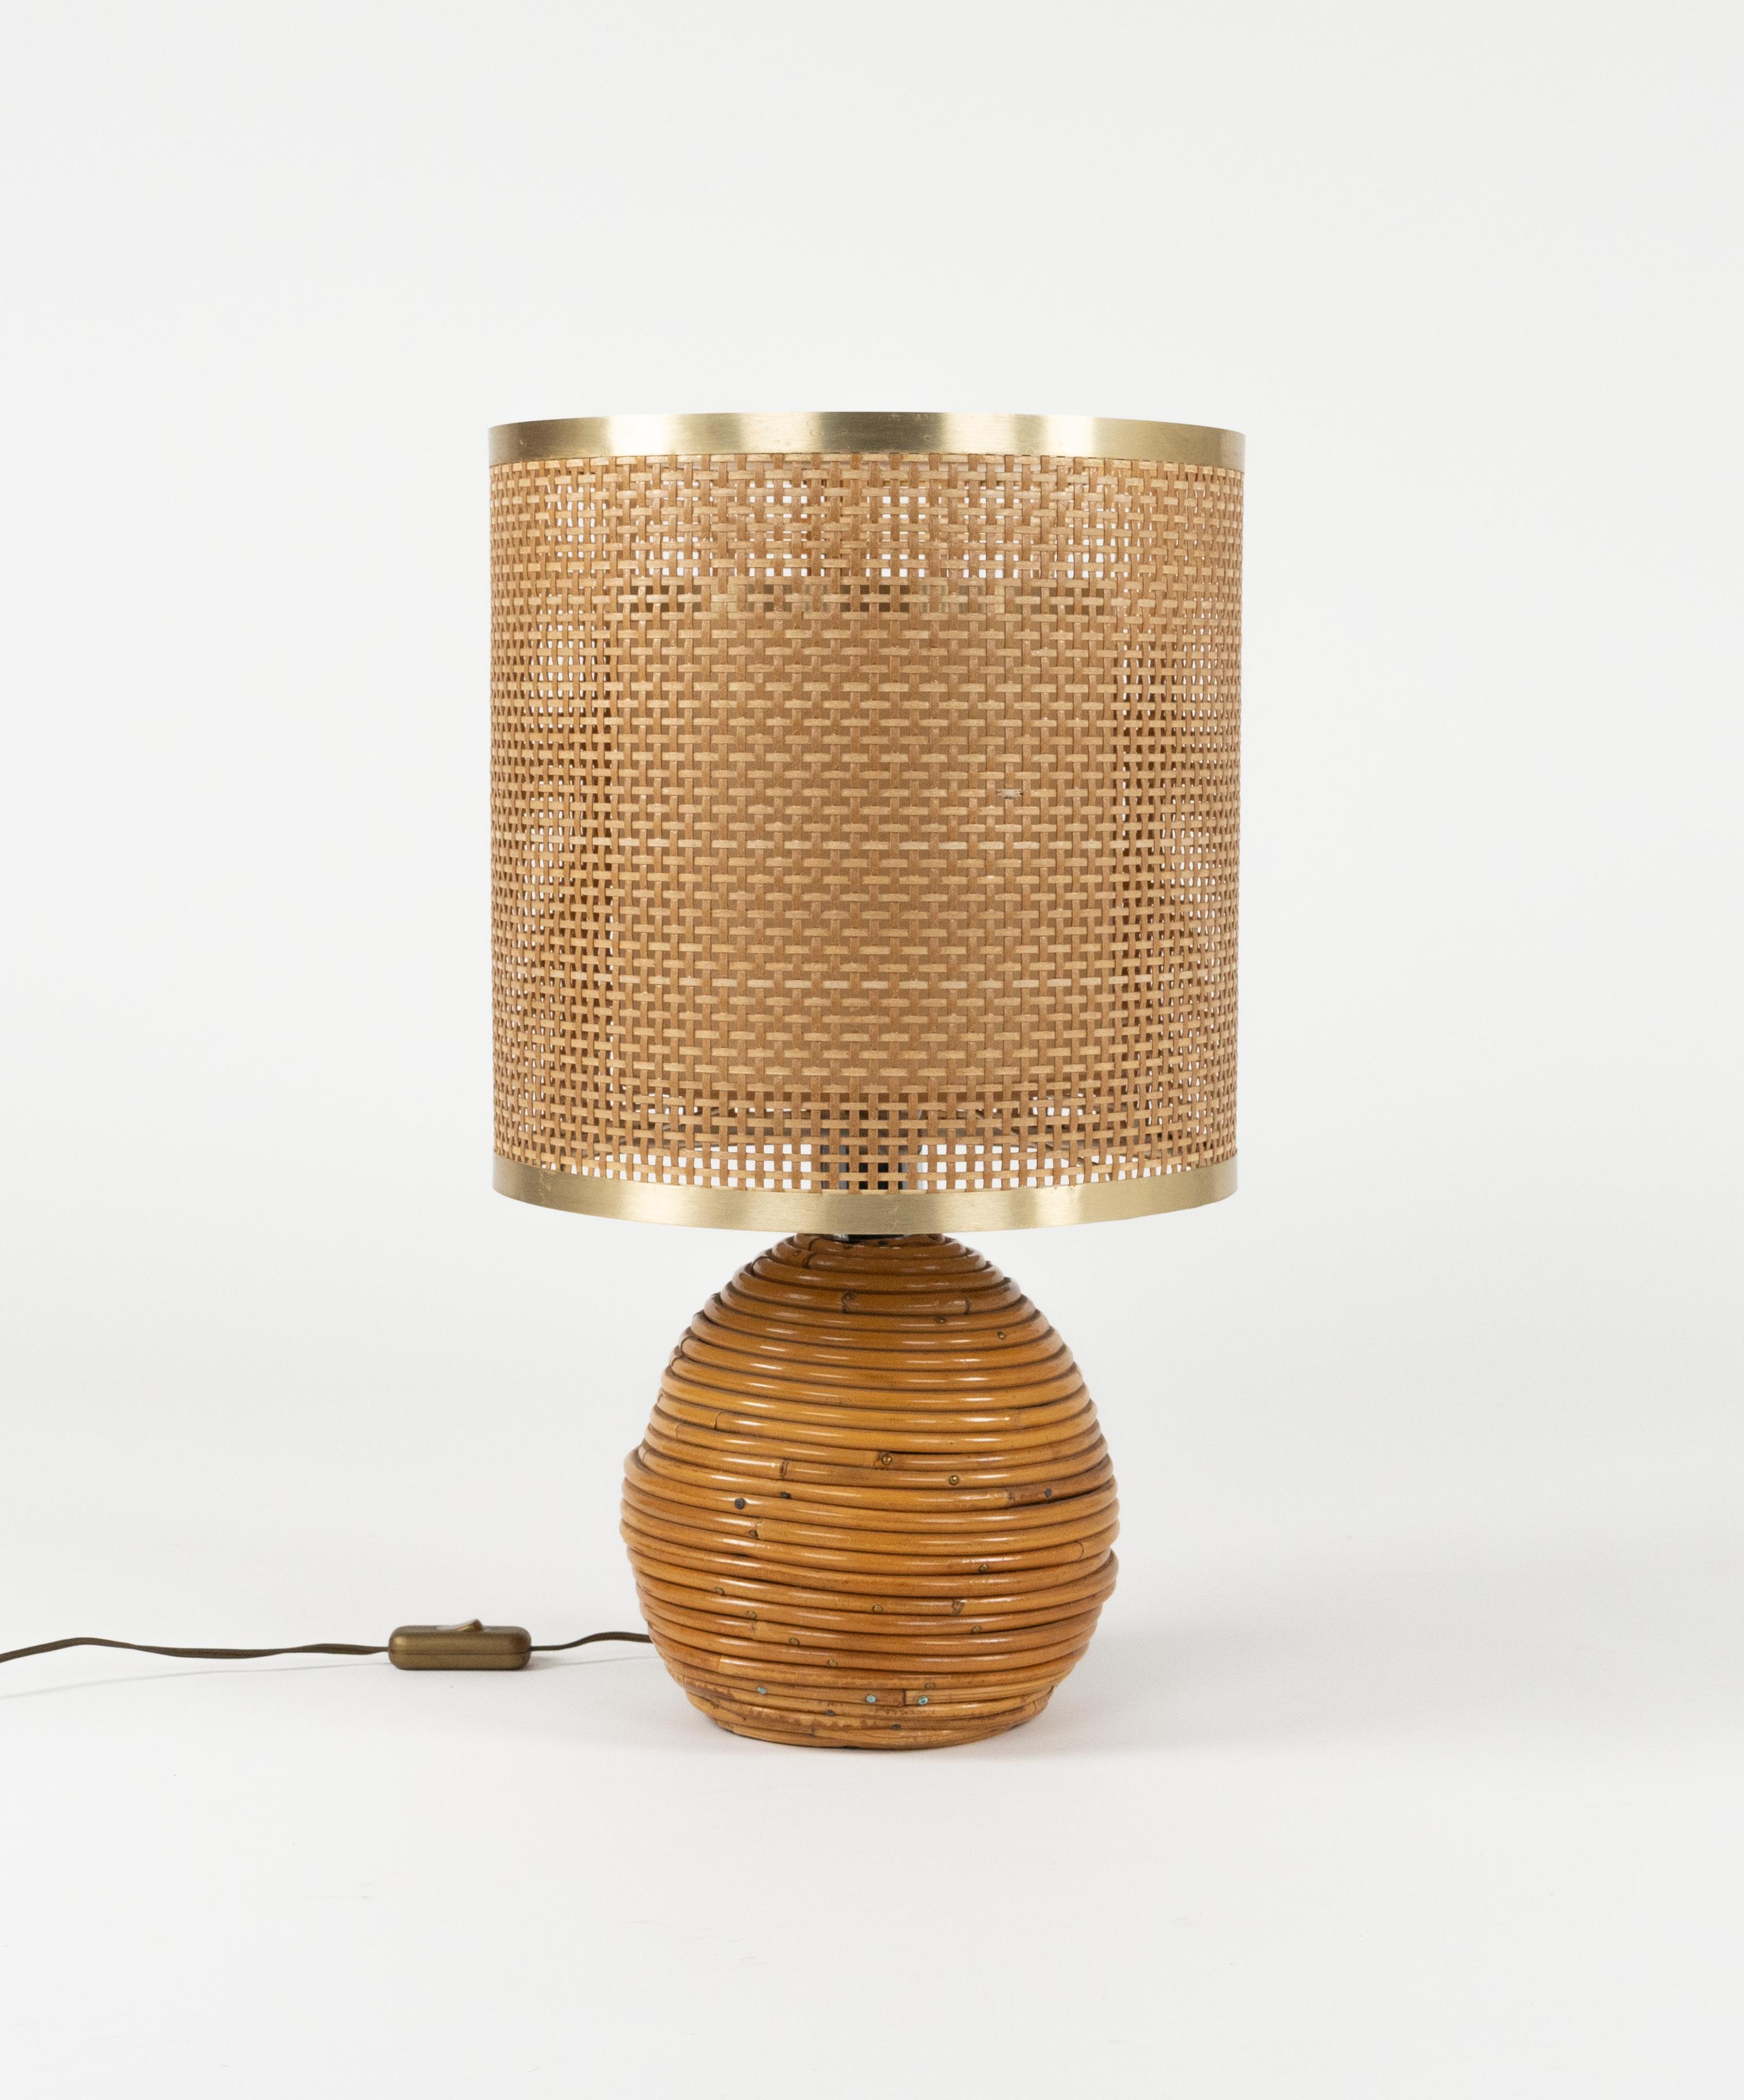 Italian Midcentury Rattan, Wicker and Chrome Table Lamp by Vivai Del Sud, Italy 1970s